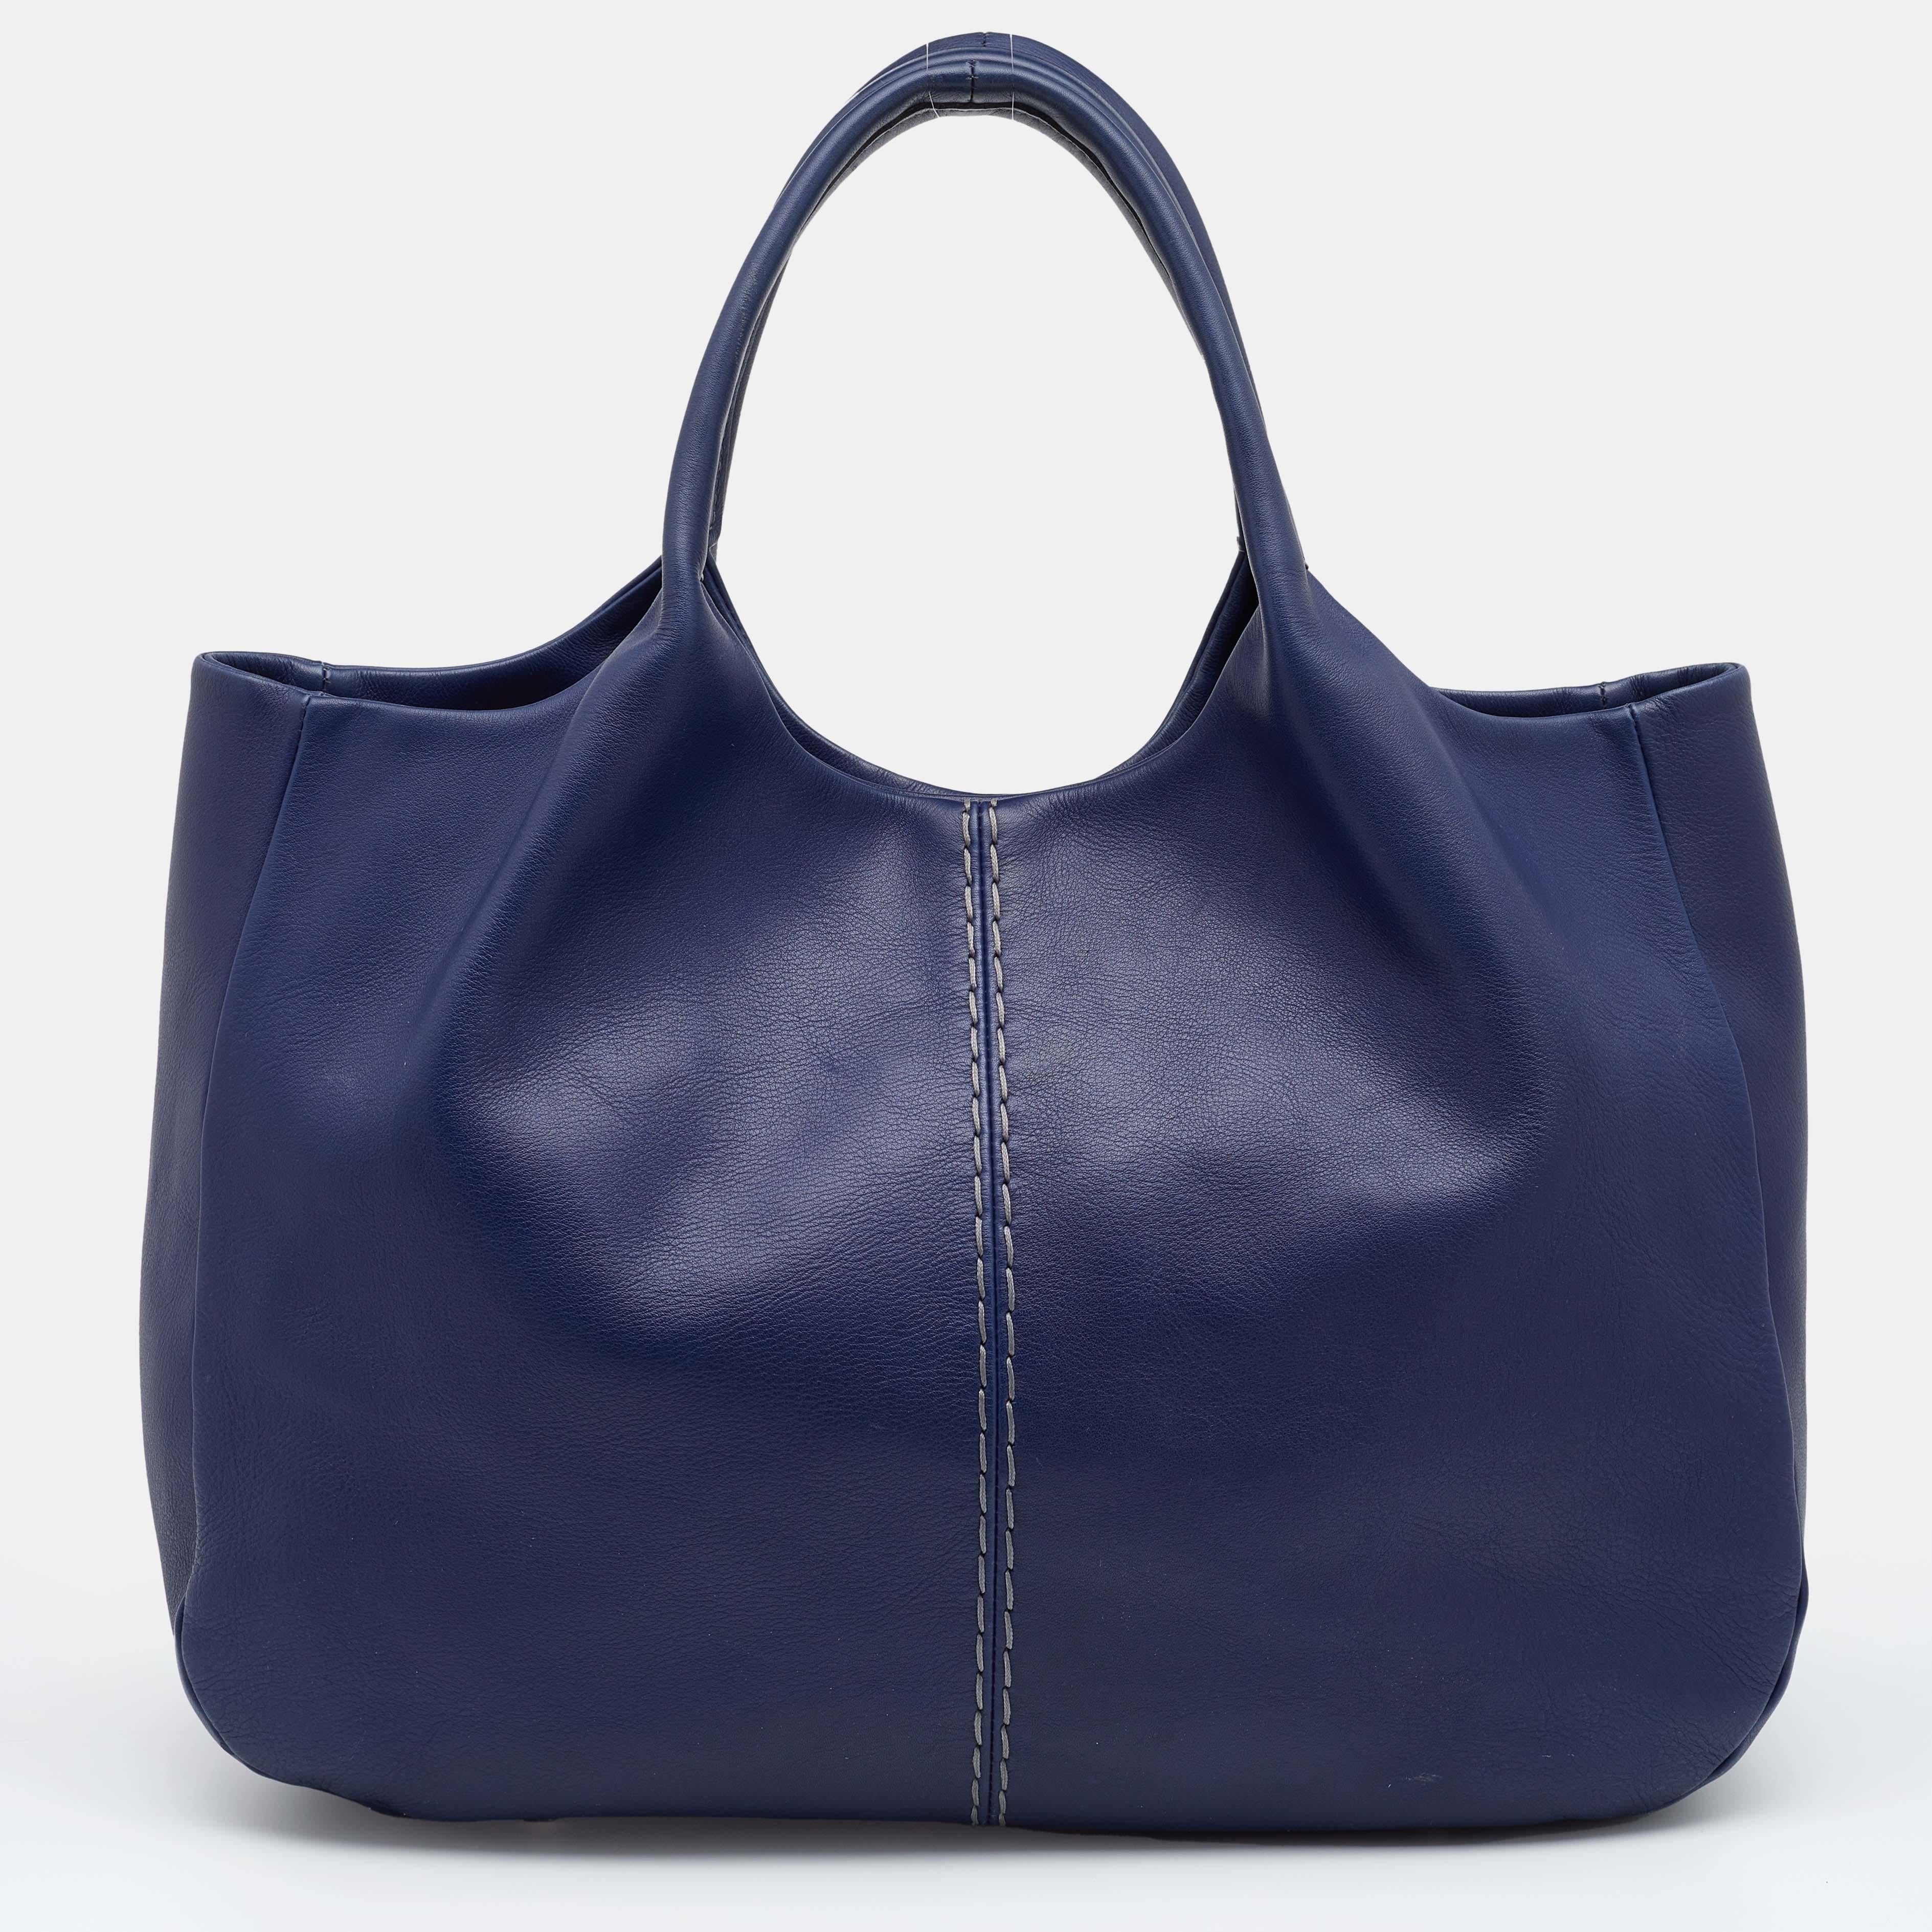 With a functional design, this Tod's tote works well as an everyday accessory. It comes created from leather and is held by dual handles at the top. Lined with fabric, its interior has enough space to easily accommodate your daily essentials. The